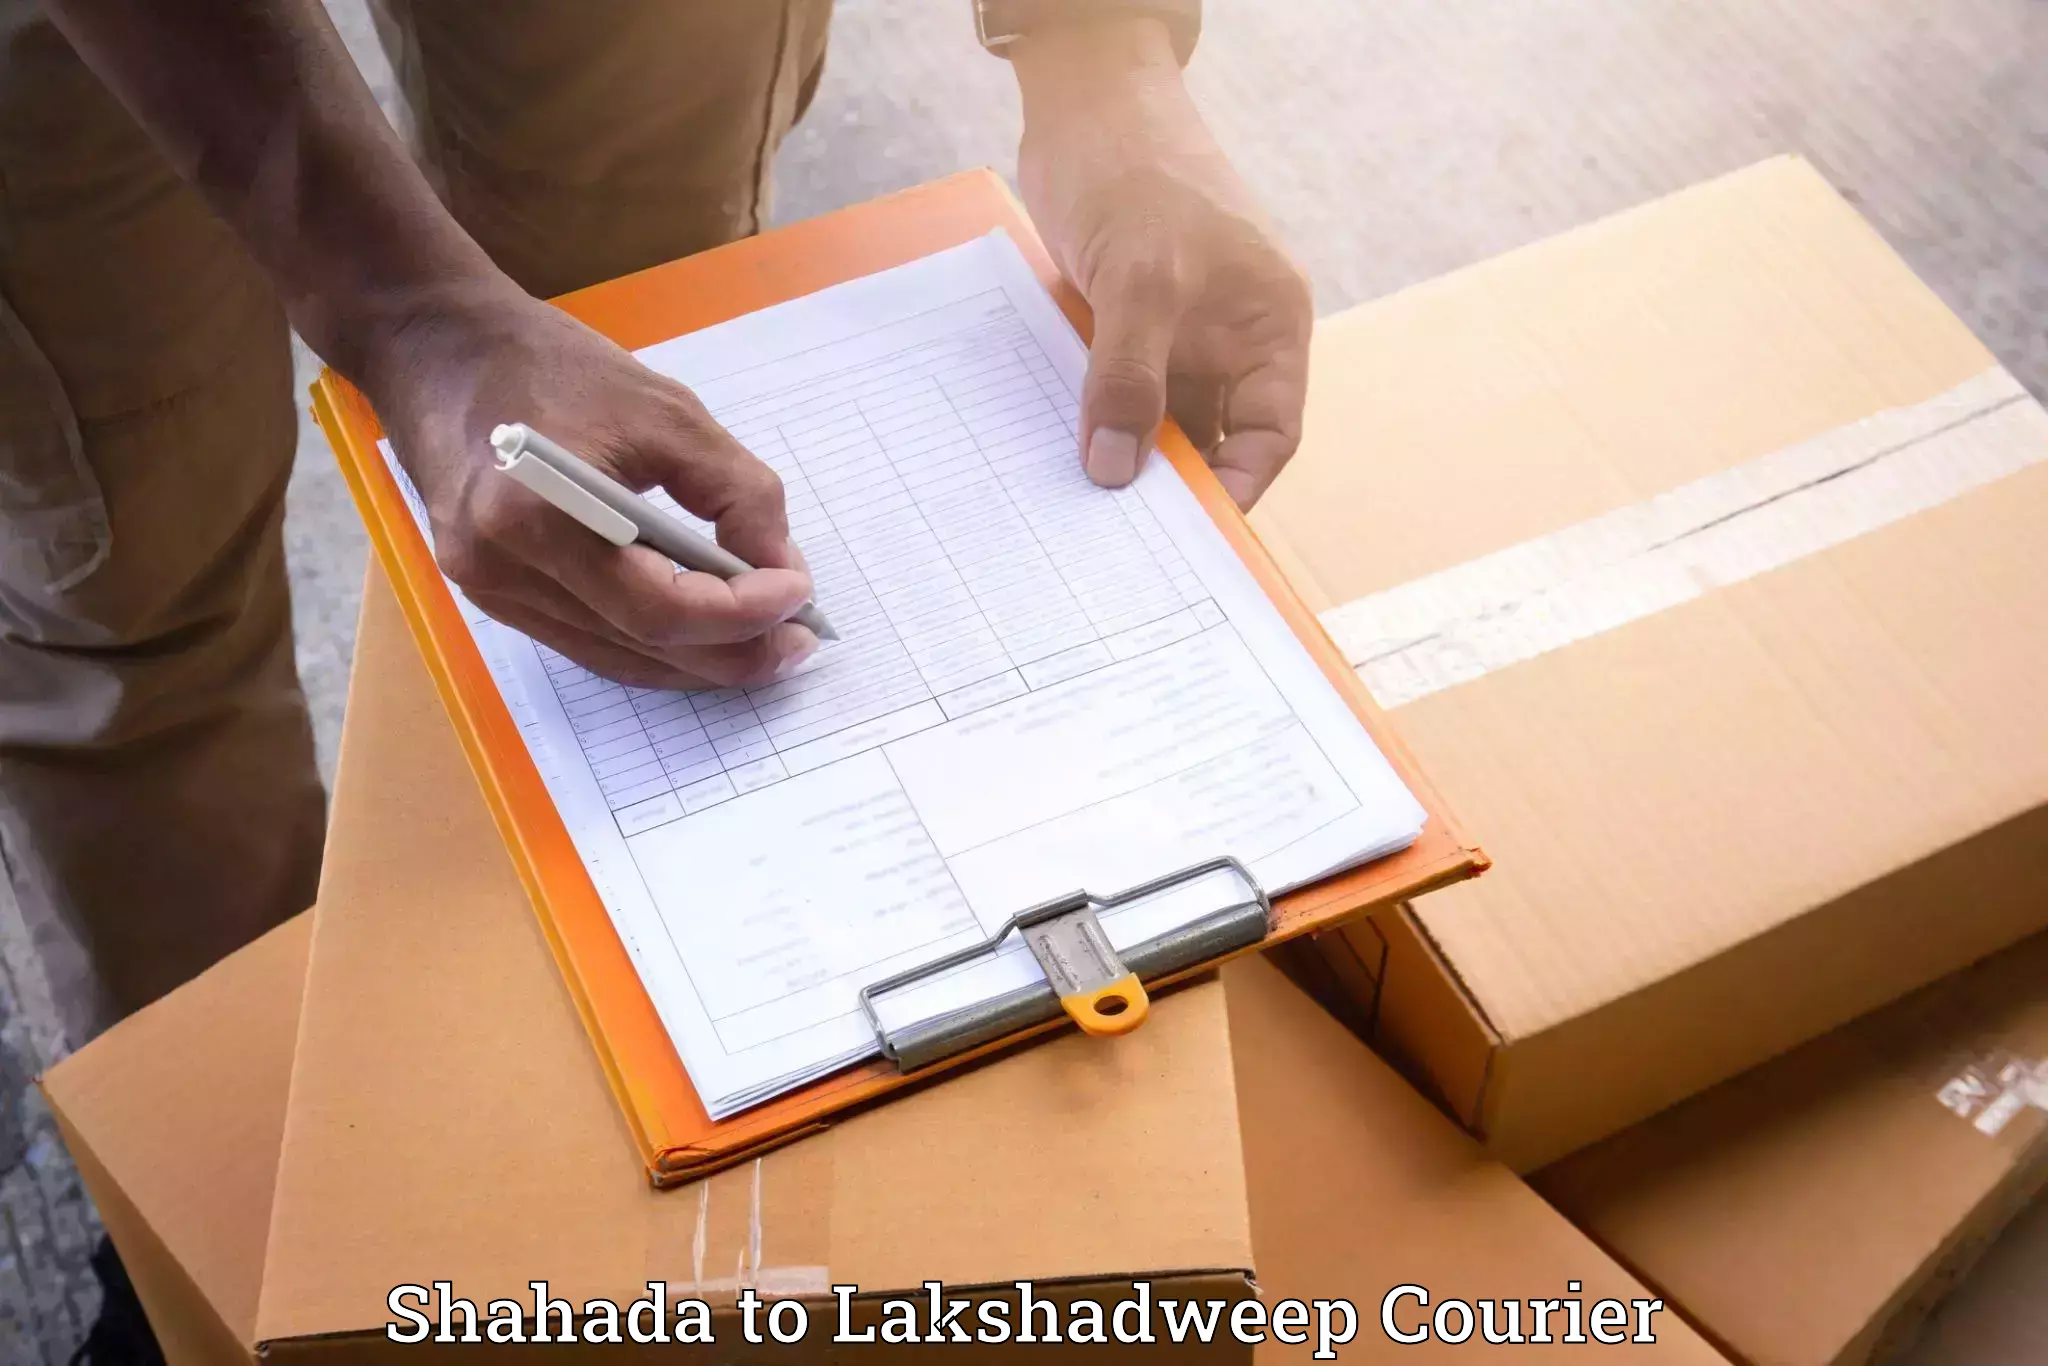 Furniture moving specialists Shahada to Lakshadweep